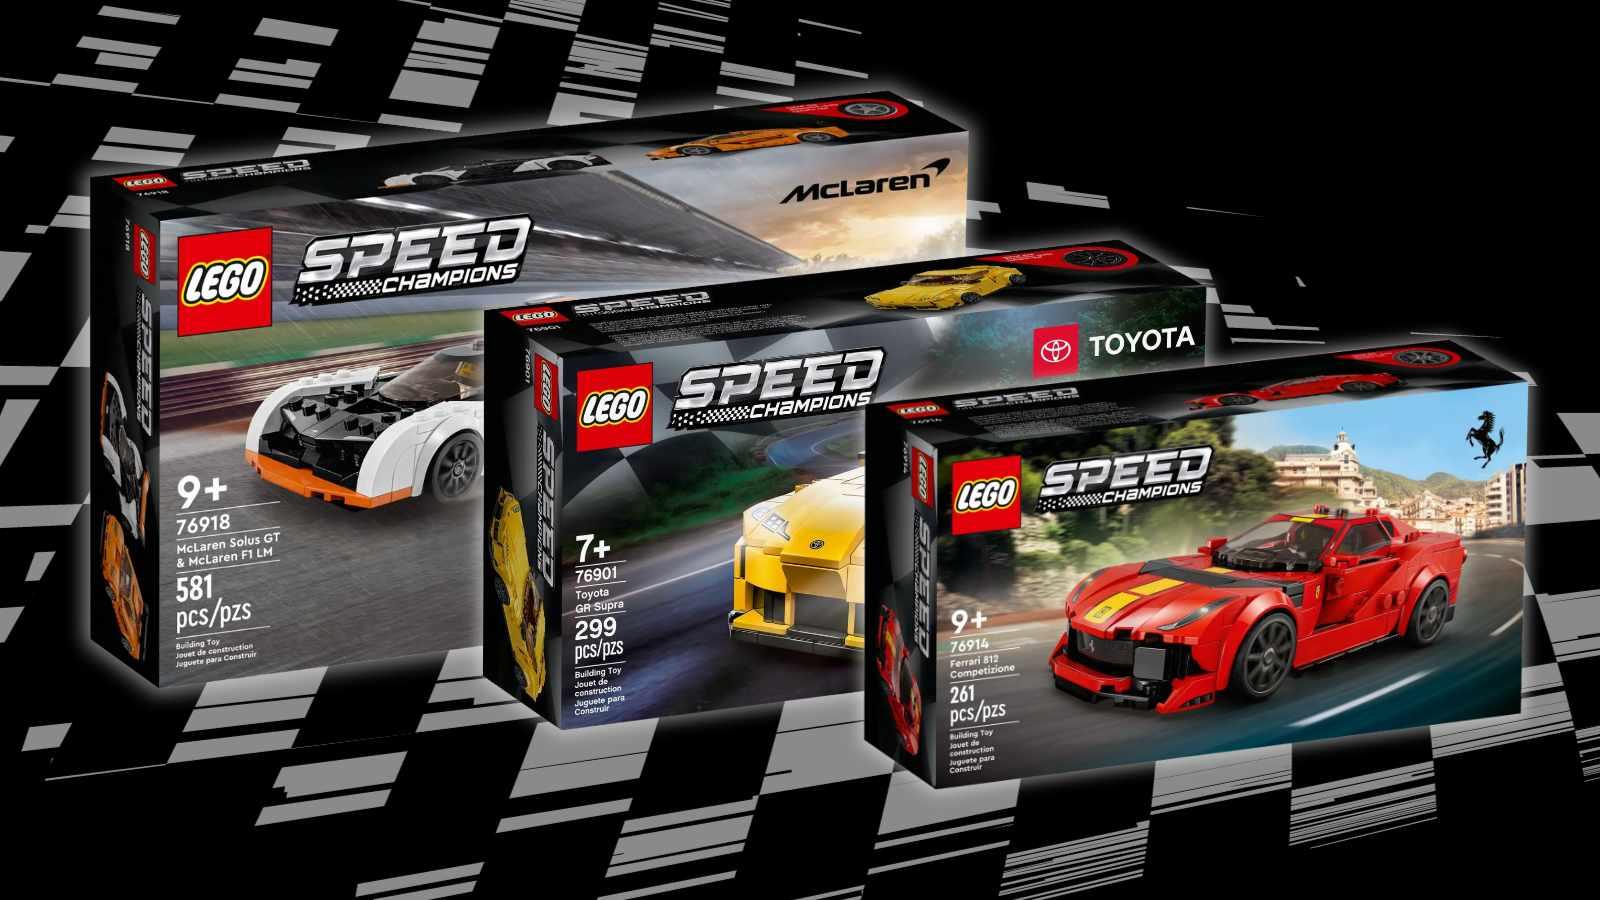 Three LEGO Speed Champions sets on a black background with racing-flag graphics